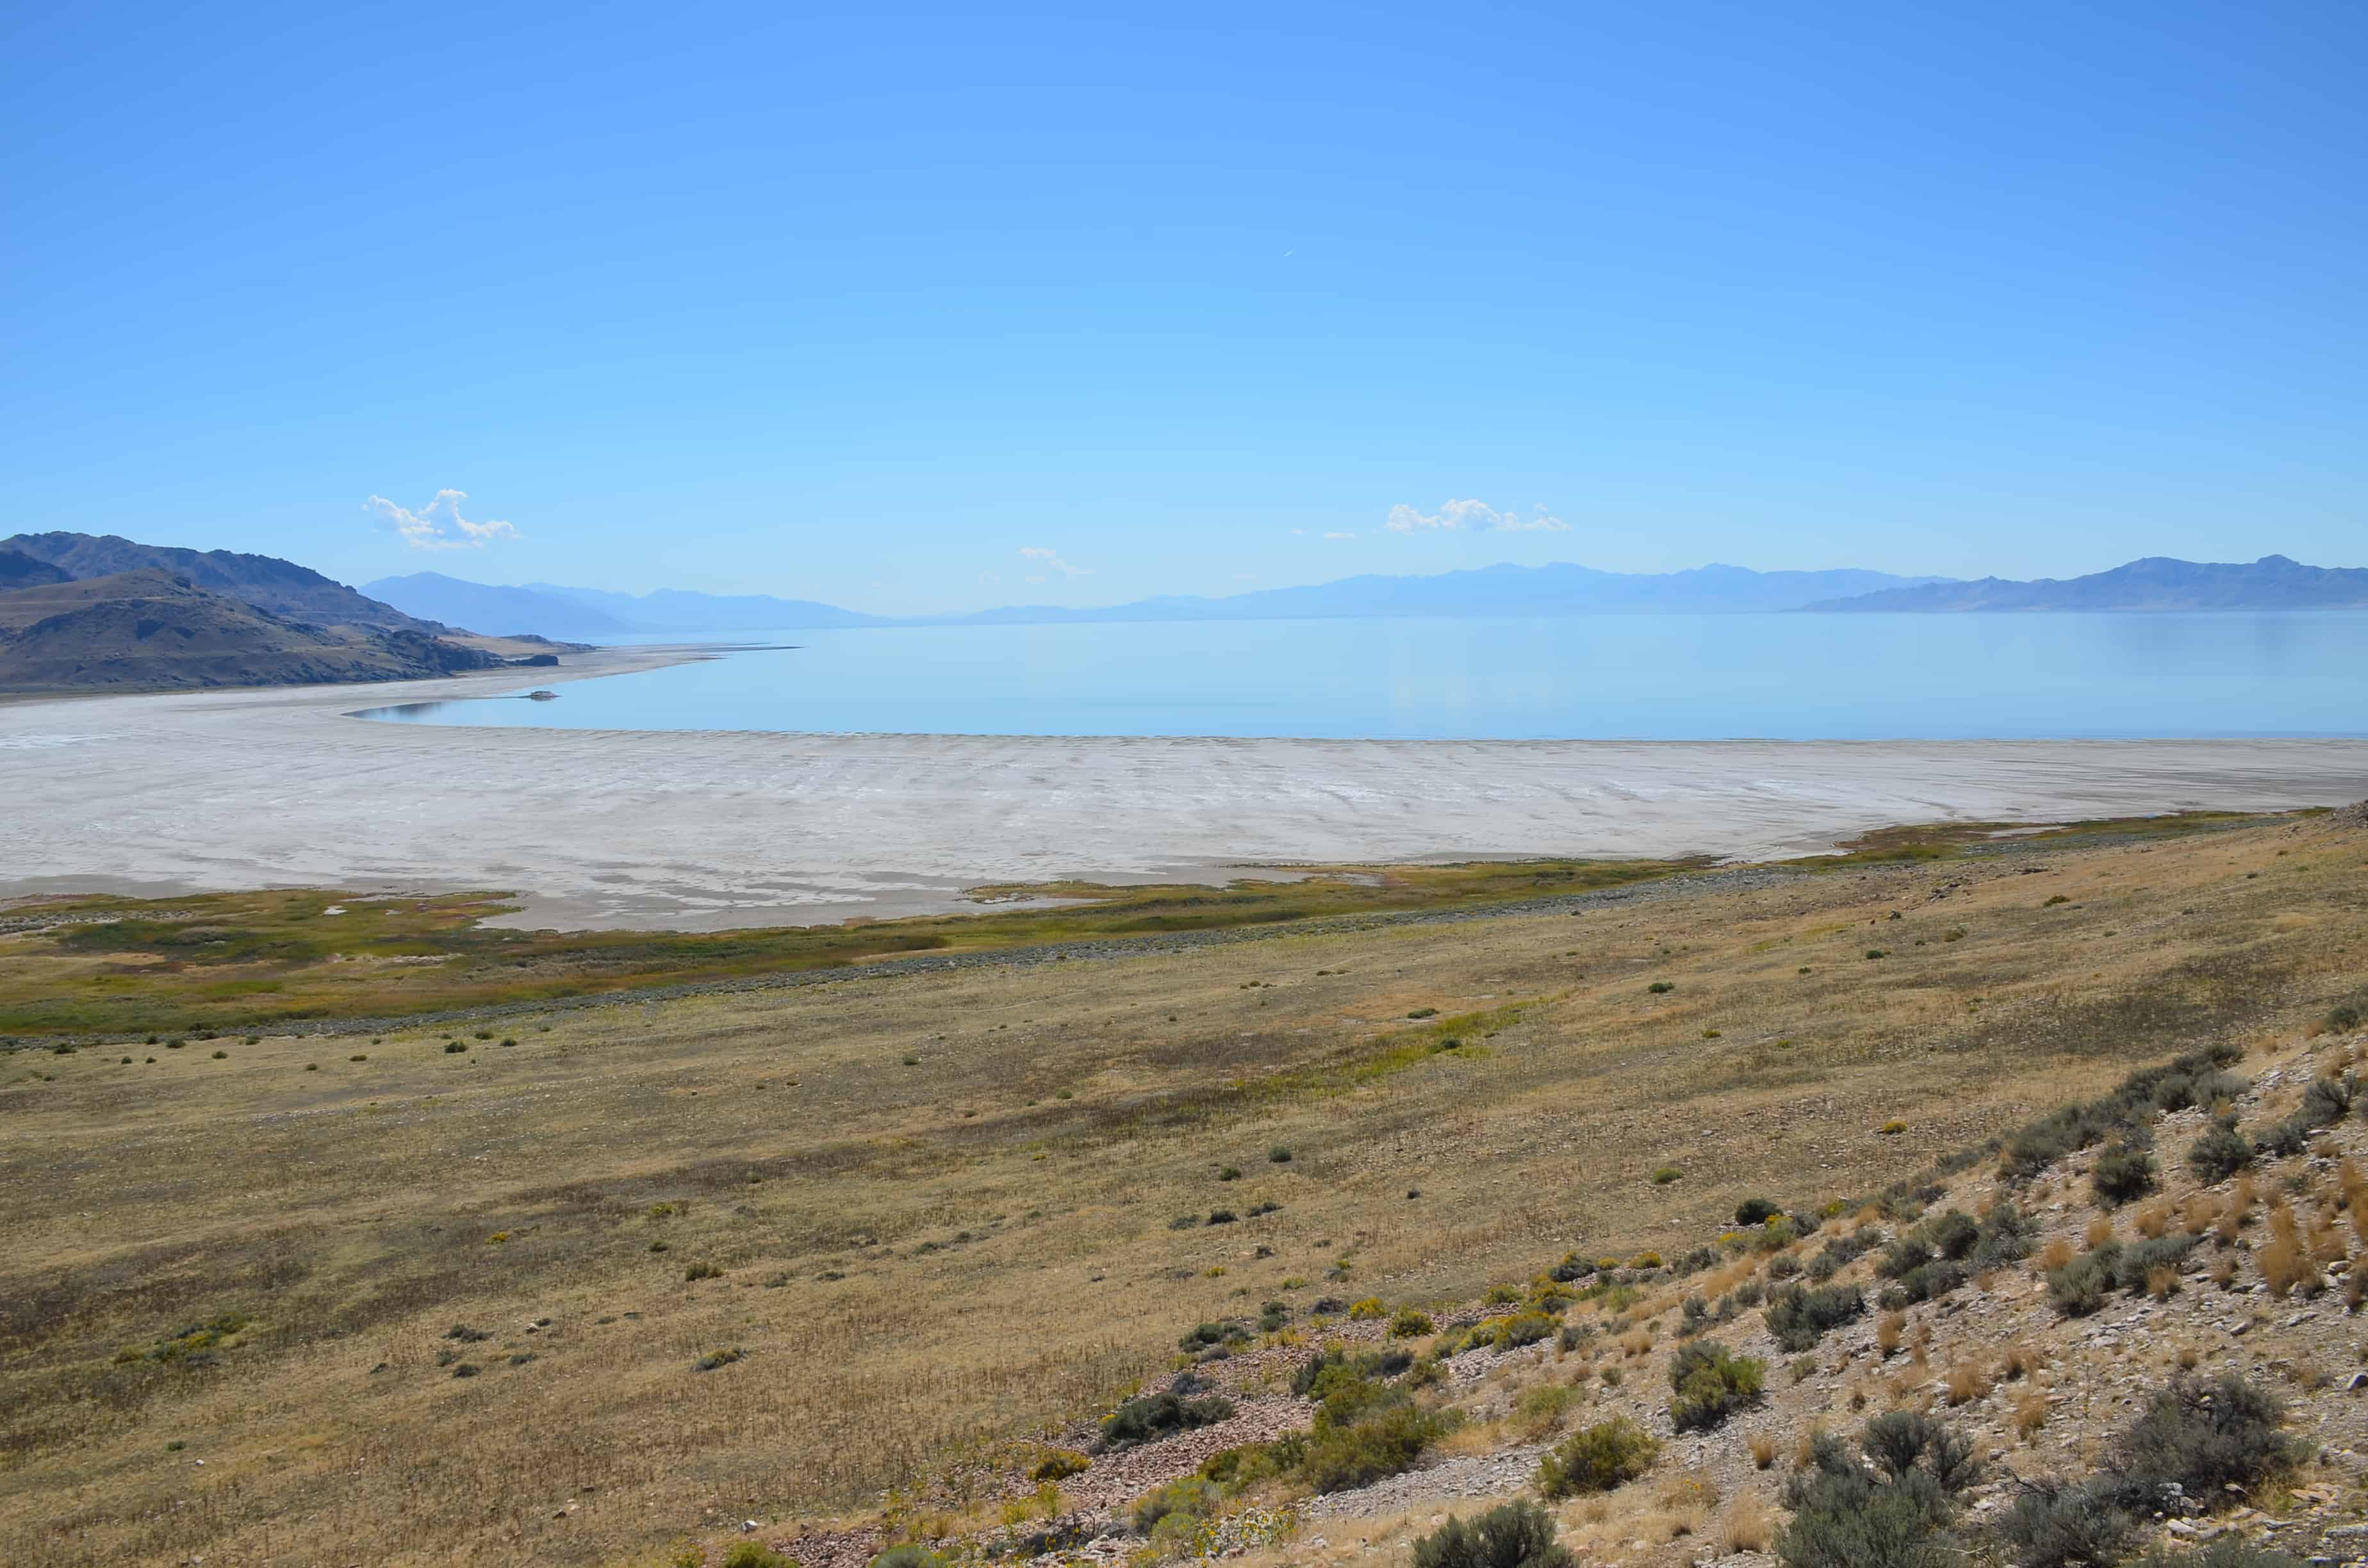 View of White Rock Bay from Buffalo Point at Antelope Island State Park in Utah